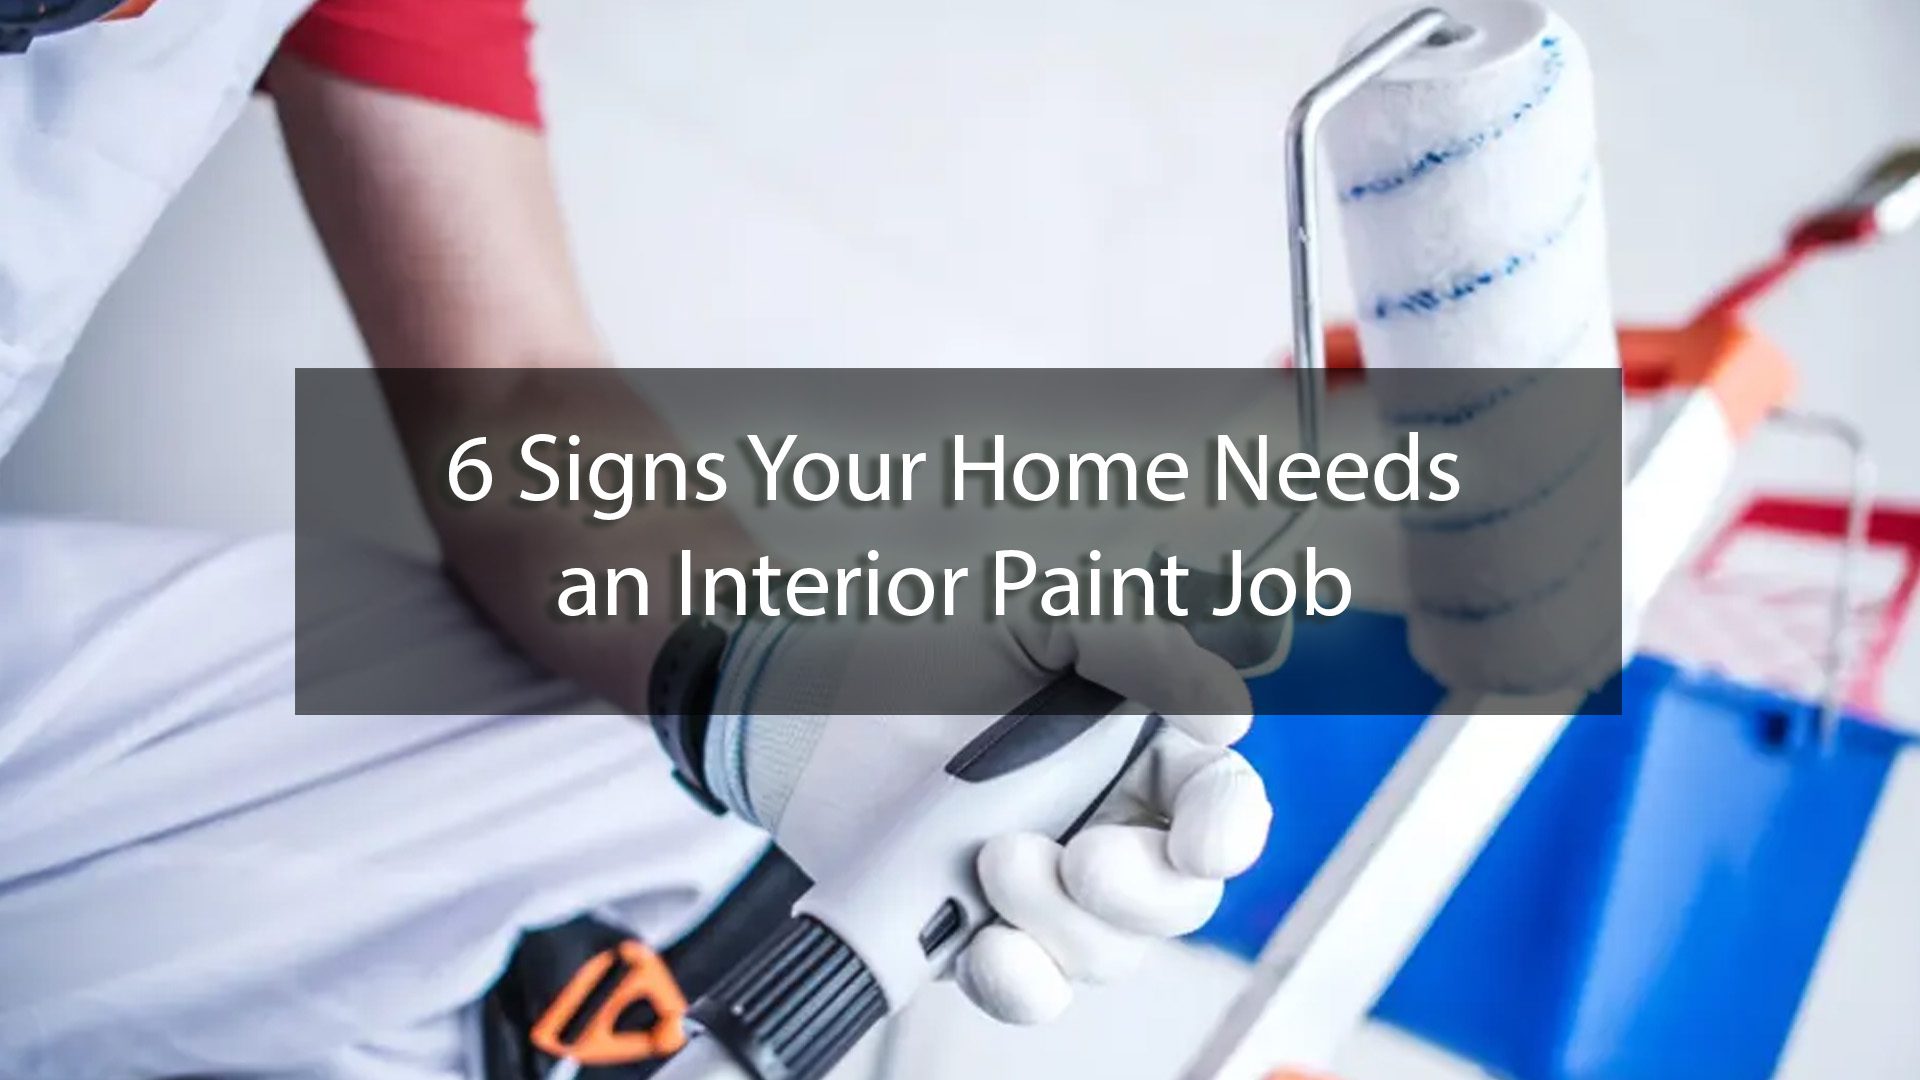 6 Signs Your Home Needs an Interior Paint Job